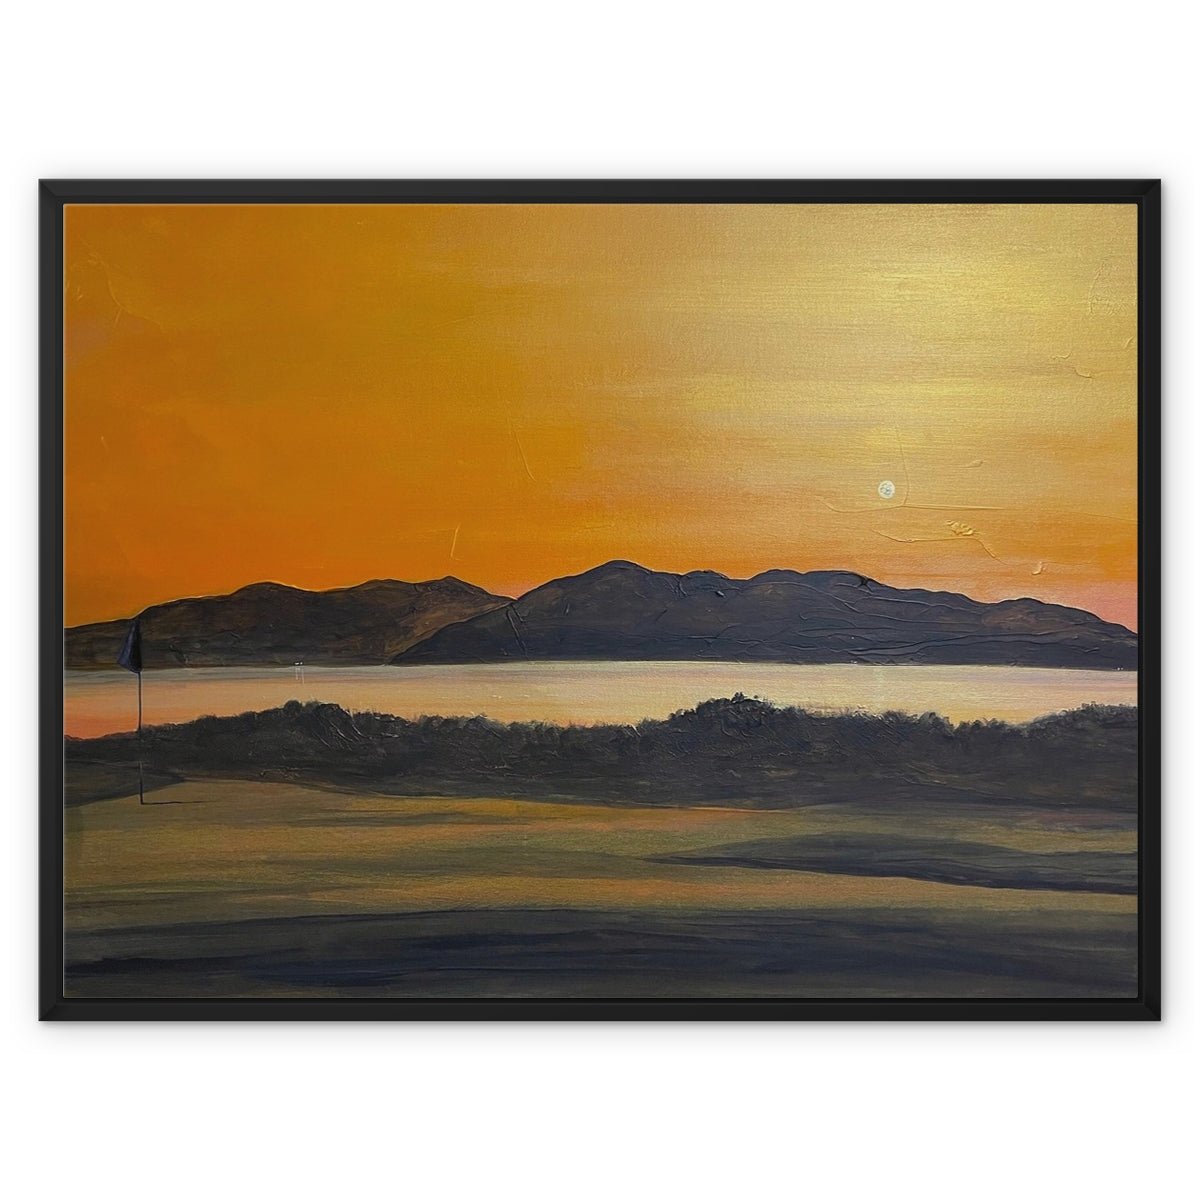 Arran & The 5th Green Royal Troon Golf Course Painting | Framed Canvas From Scotland-Floating Framed Canvas Prints-Arran Art Gallery-32"x24"-Black Frame-Paintings, Prints, Homeware, Art Gifts From Scotland By Scottish Artist Kevin Hunter